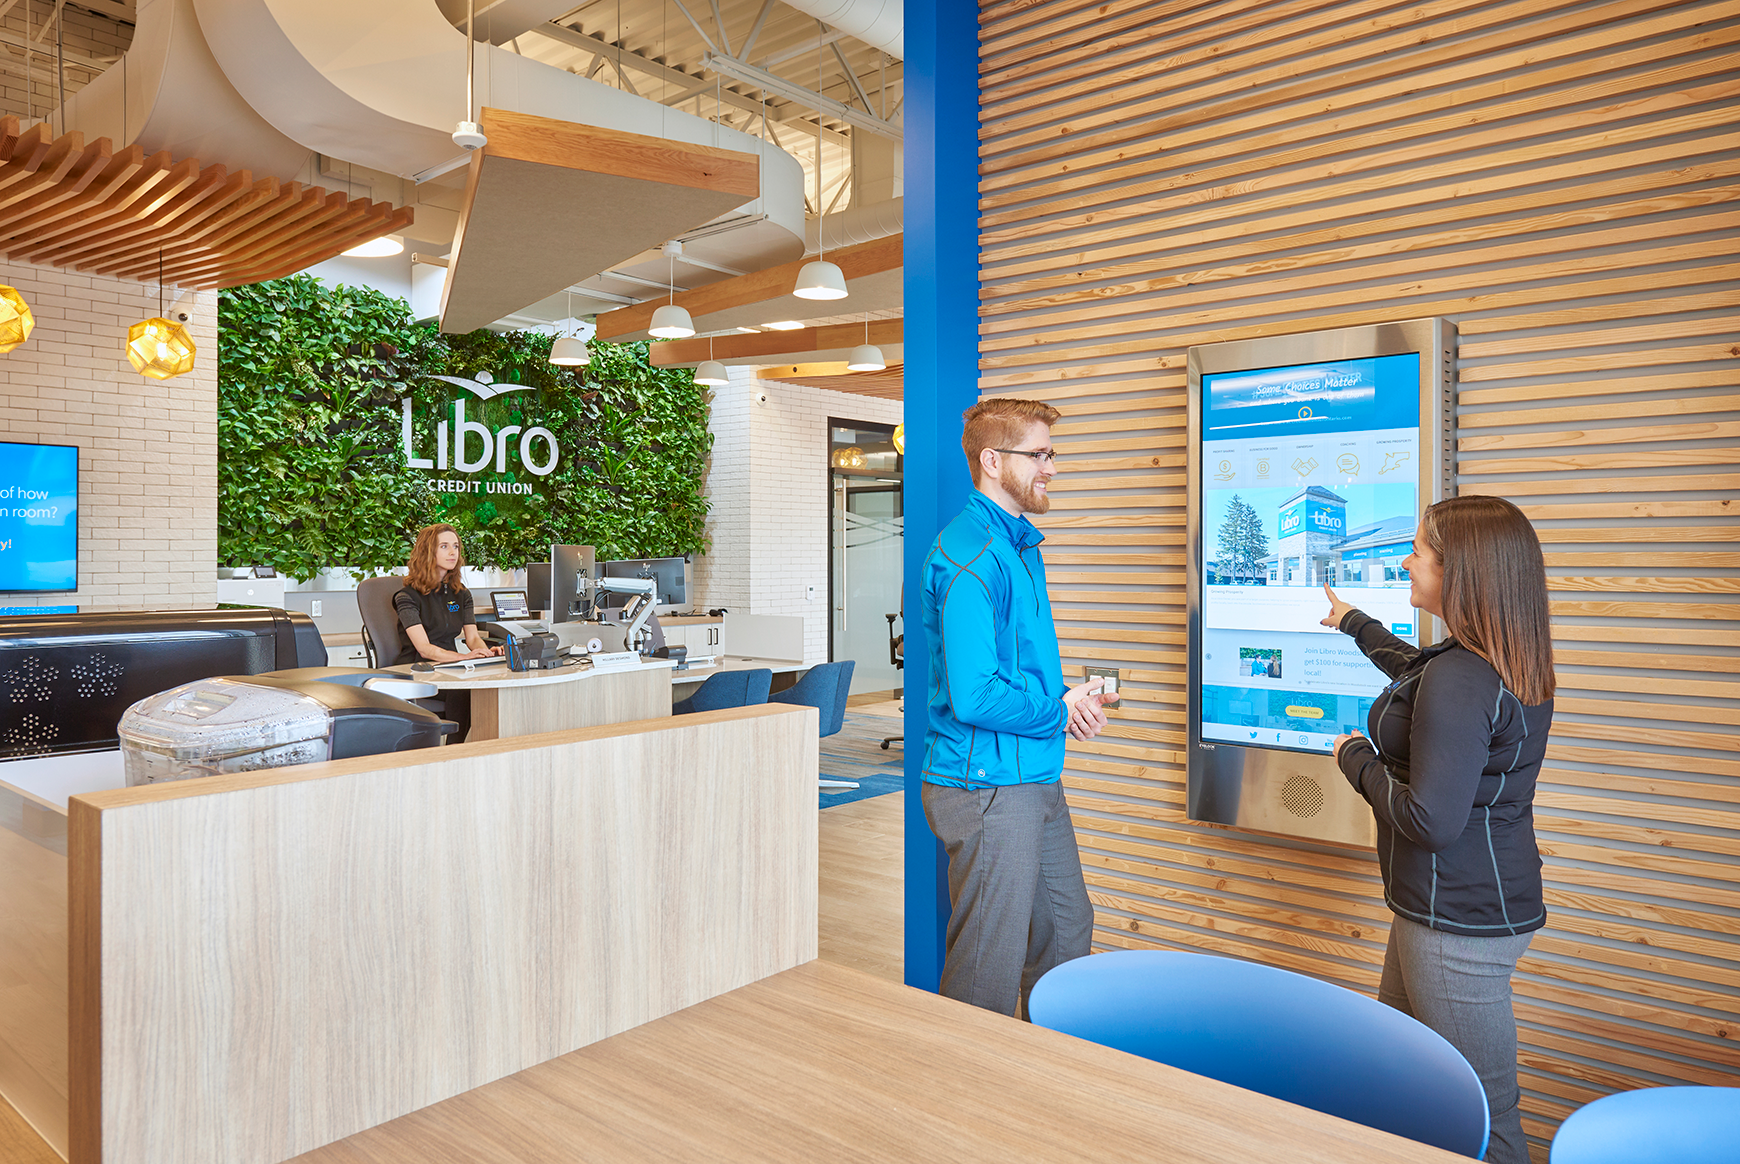 a woman sitting at a desk working and two people having a discussion around a screen in the Libro Credit Union lobby